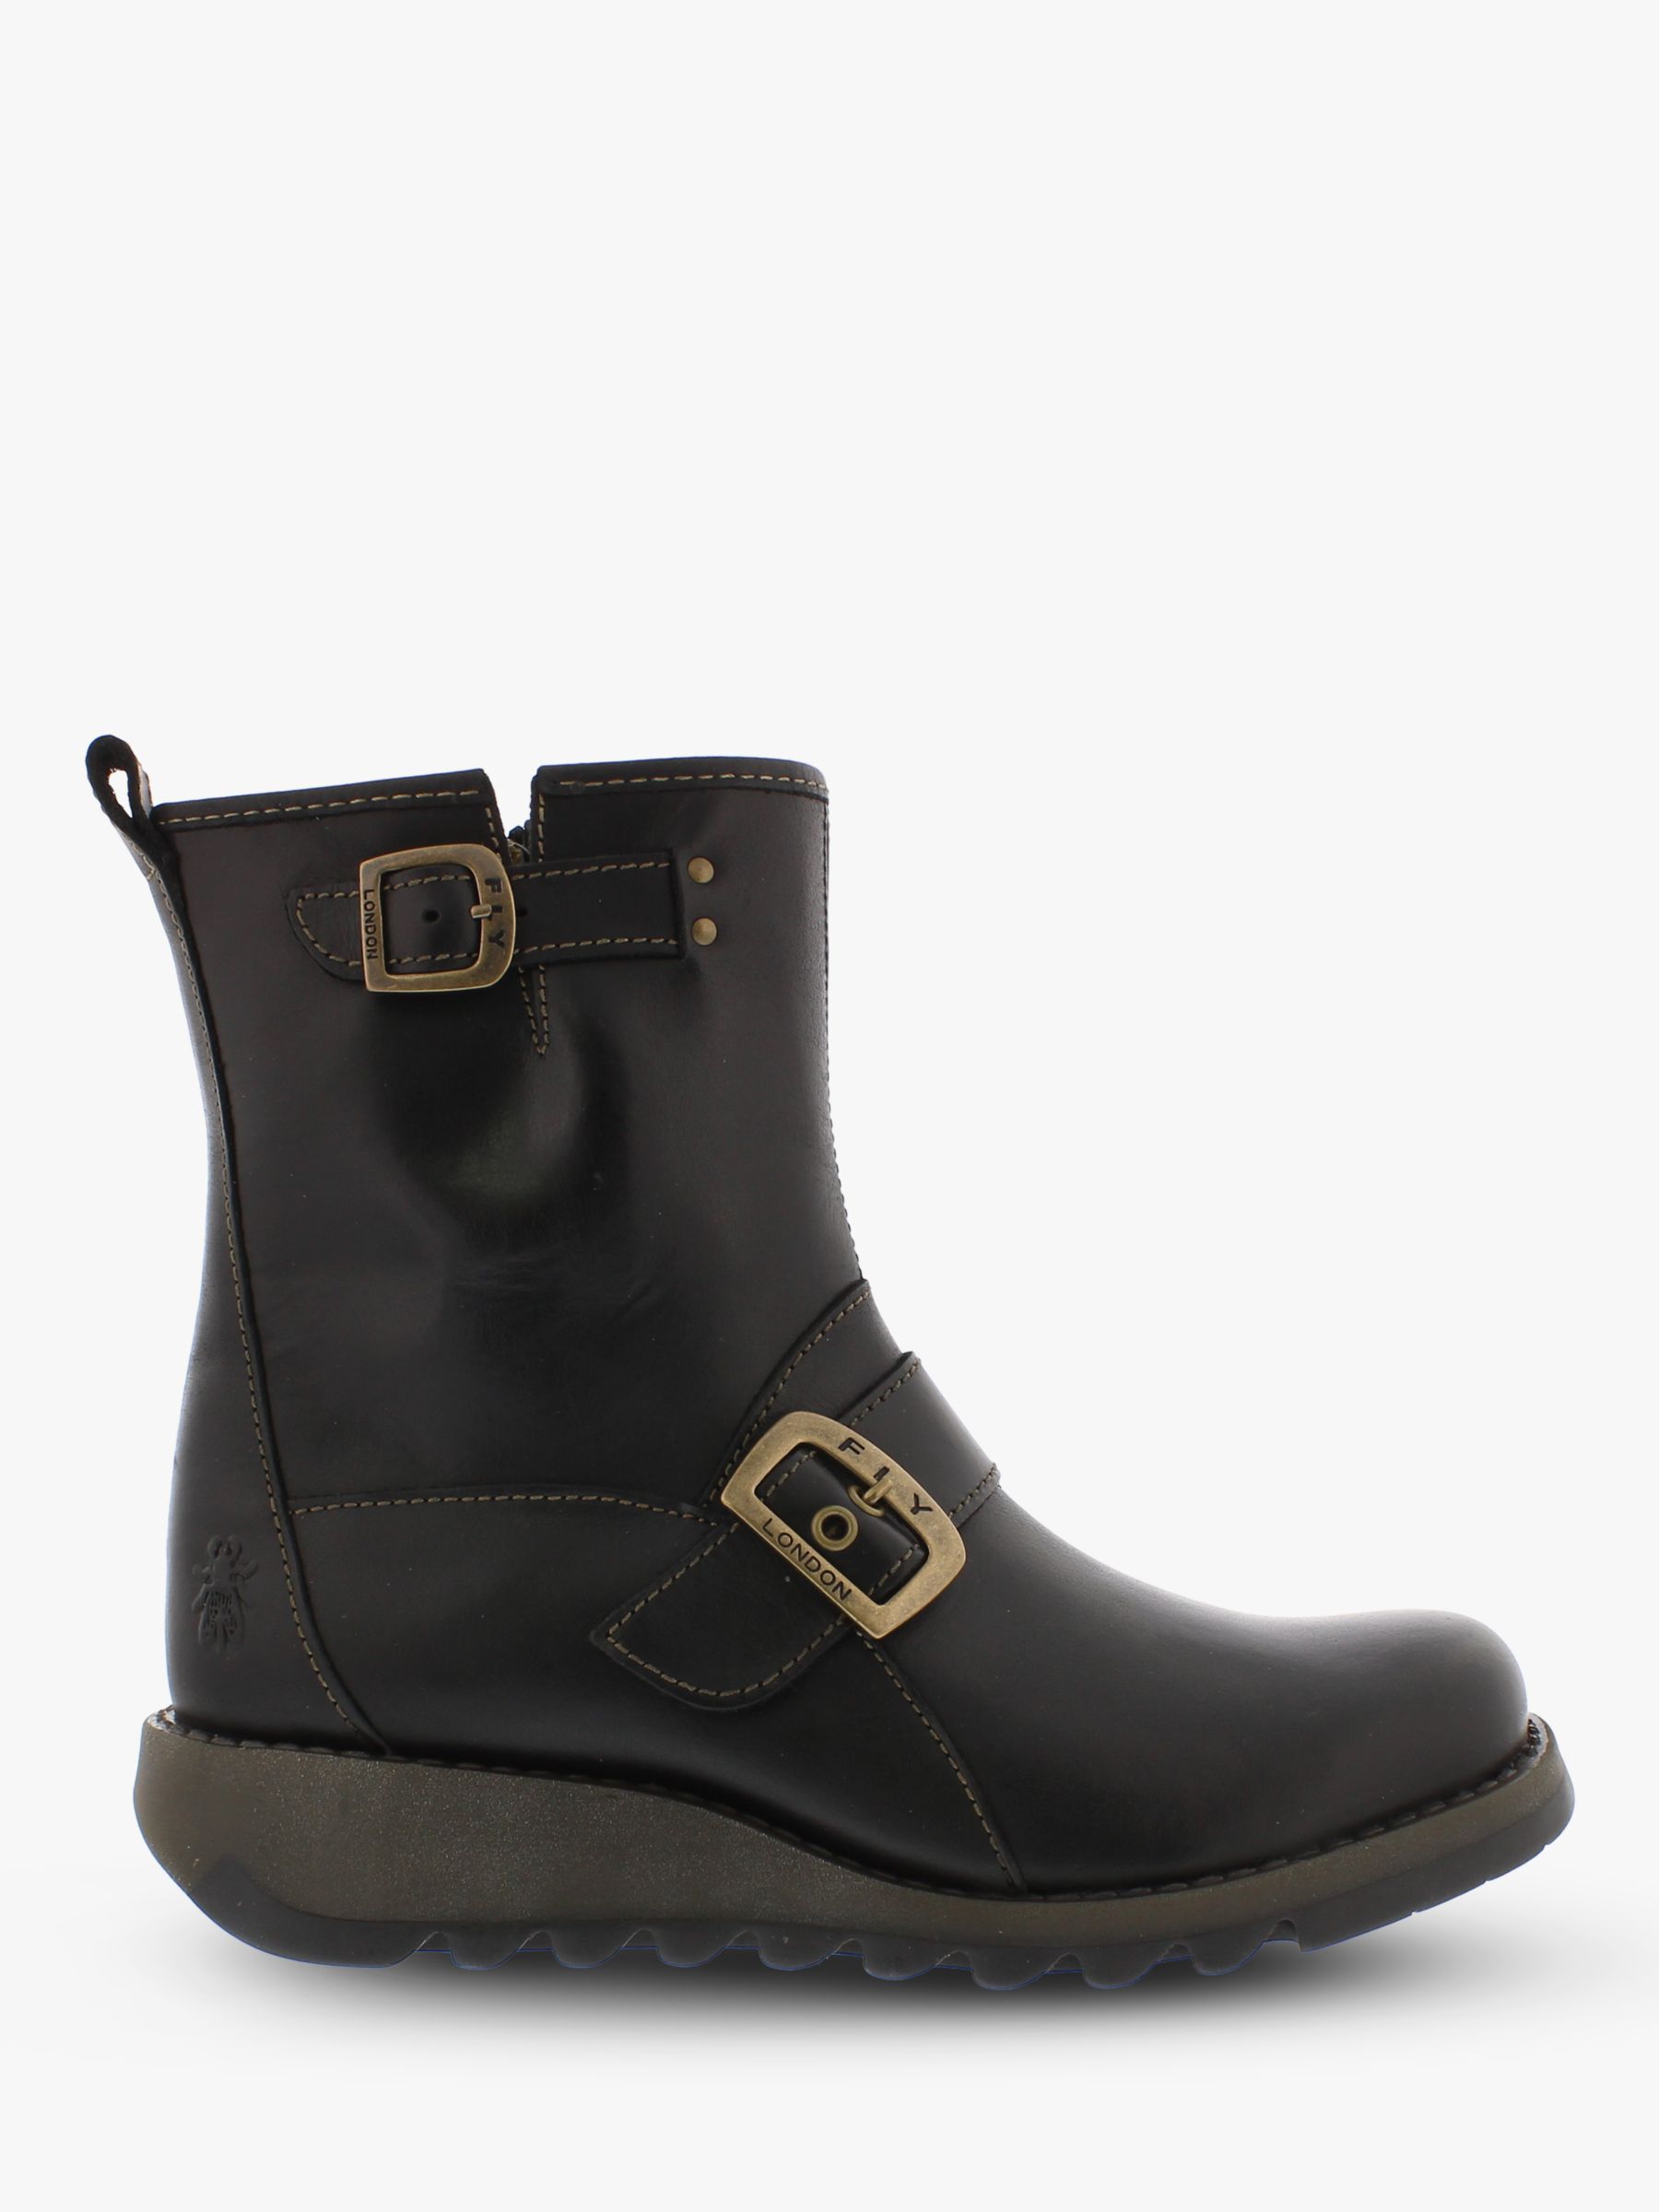 fly london womens leather boots